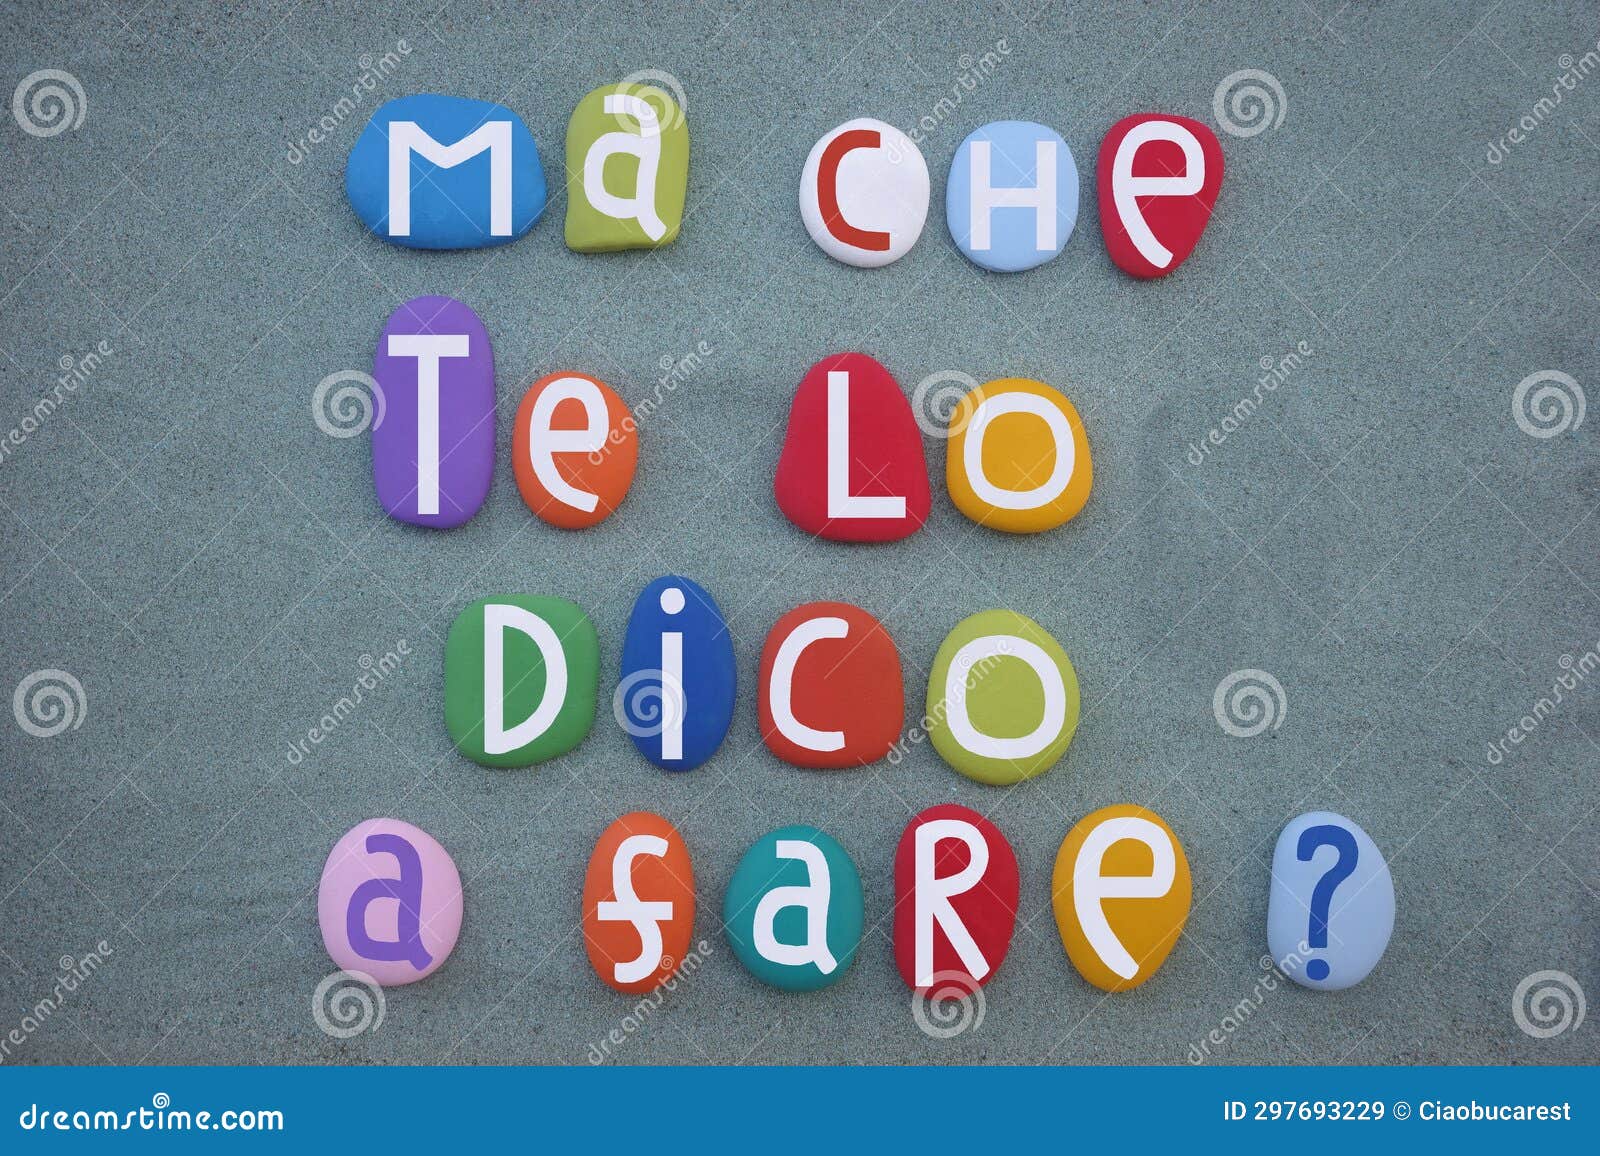 ma che te lo dico a fare, italian phrase meaning but what am i telling you to do, text with colored stone letters